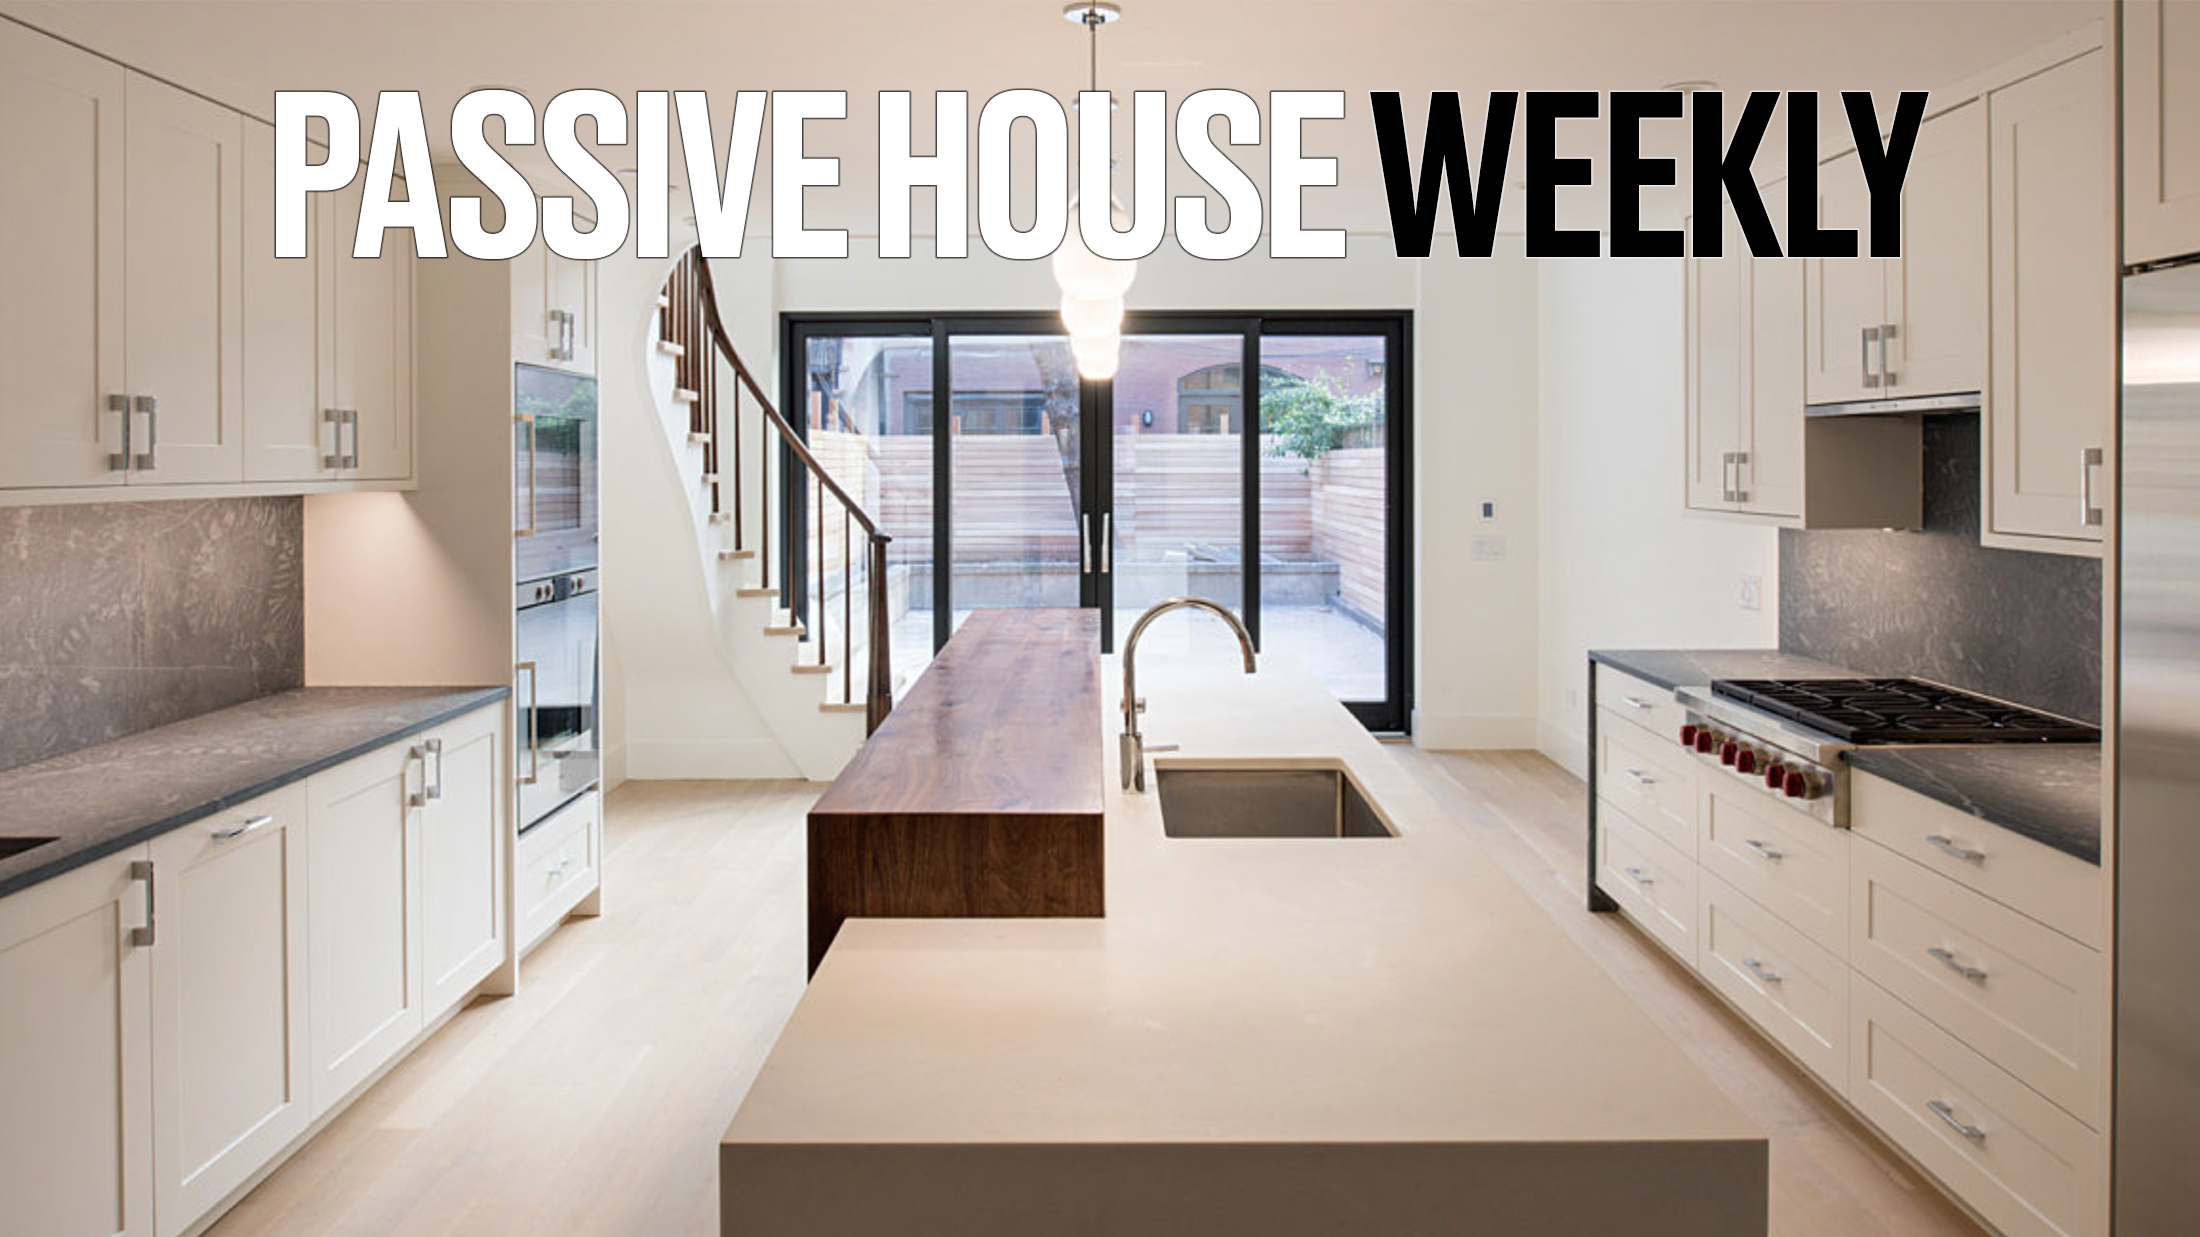 Passive House Weekly: July 4, 2022